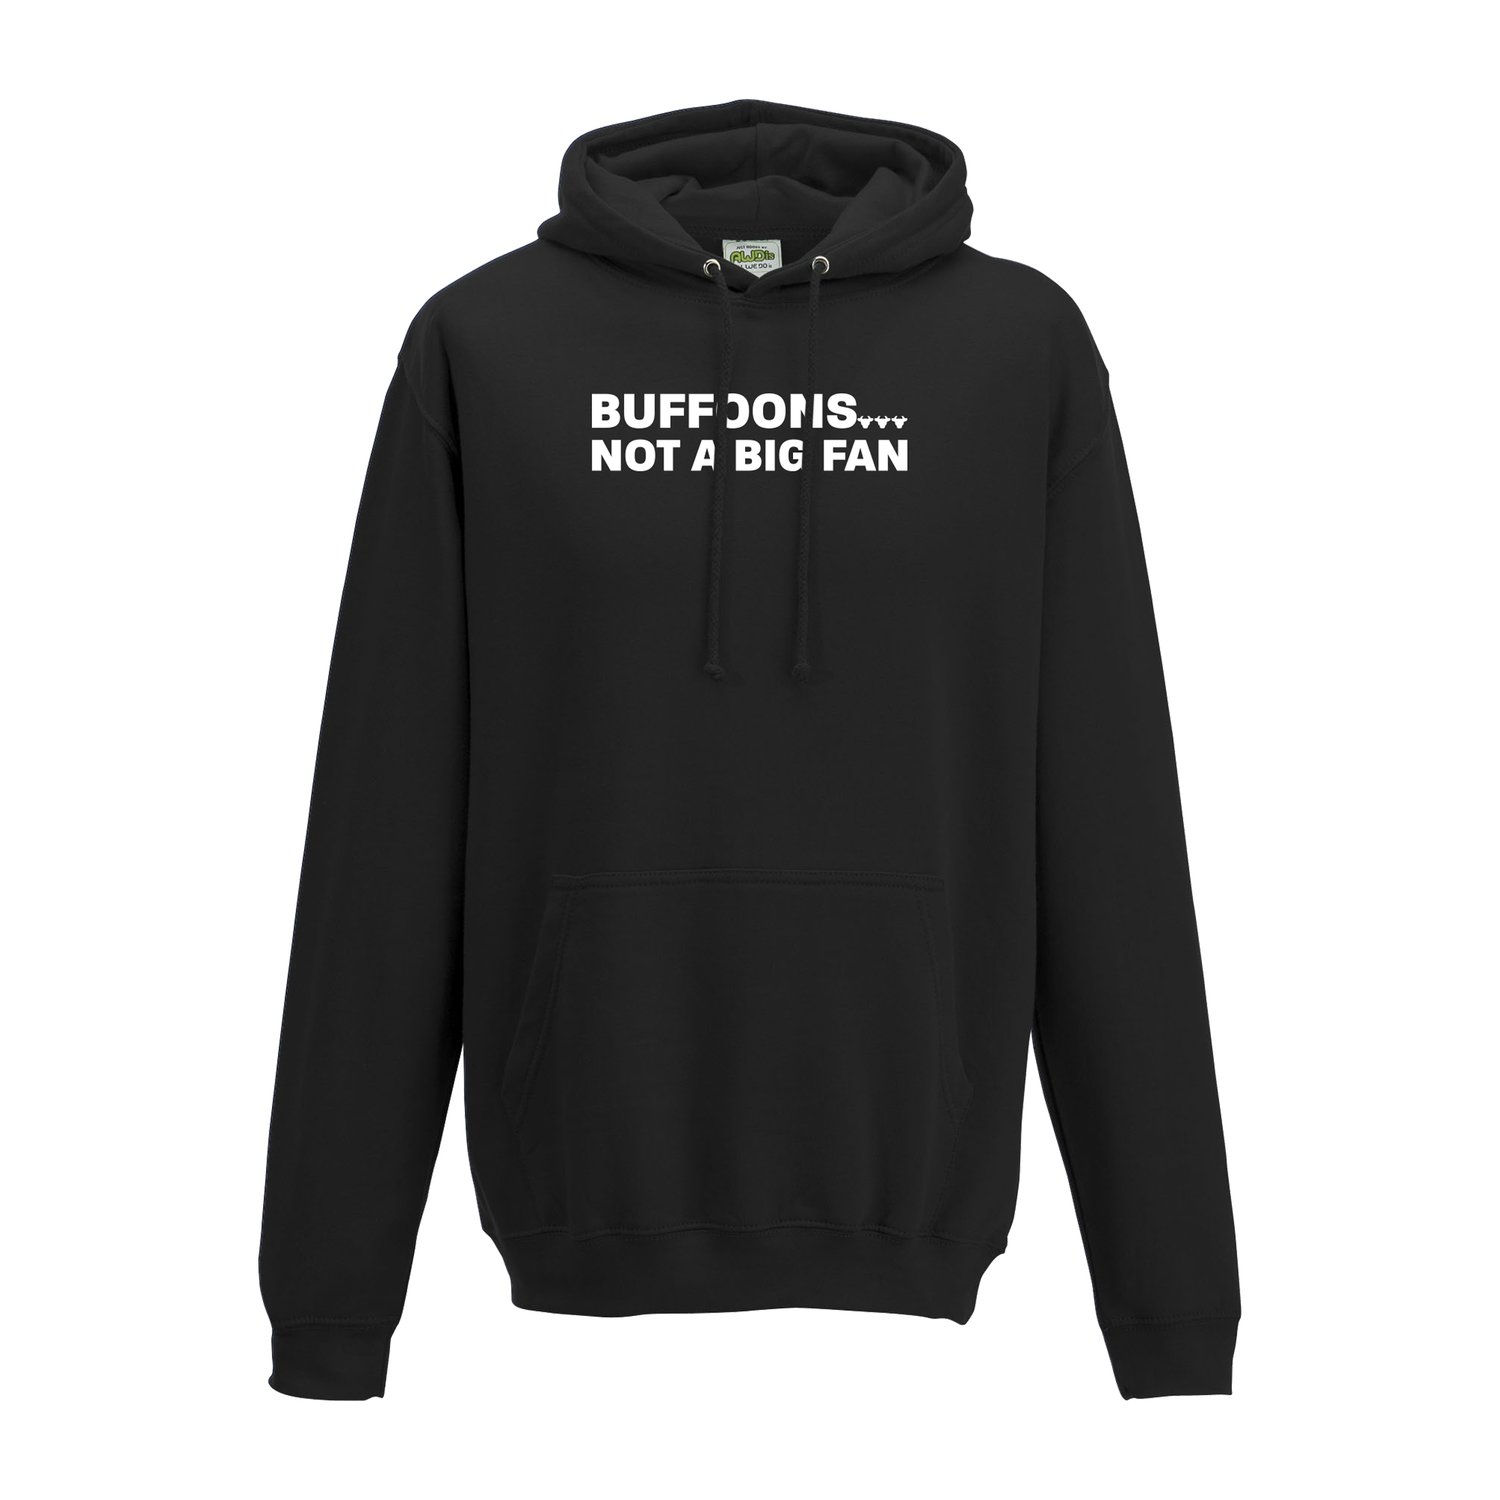 Unisex Buffoons Hooded Top